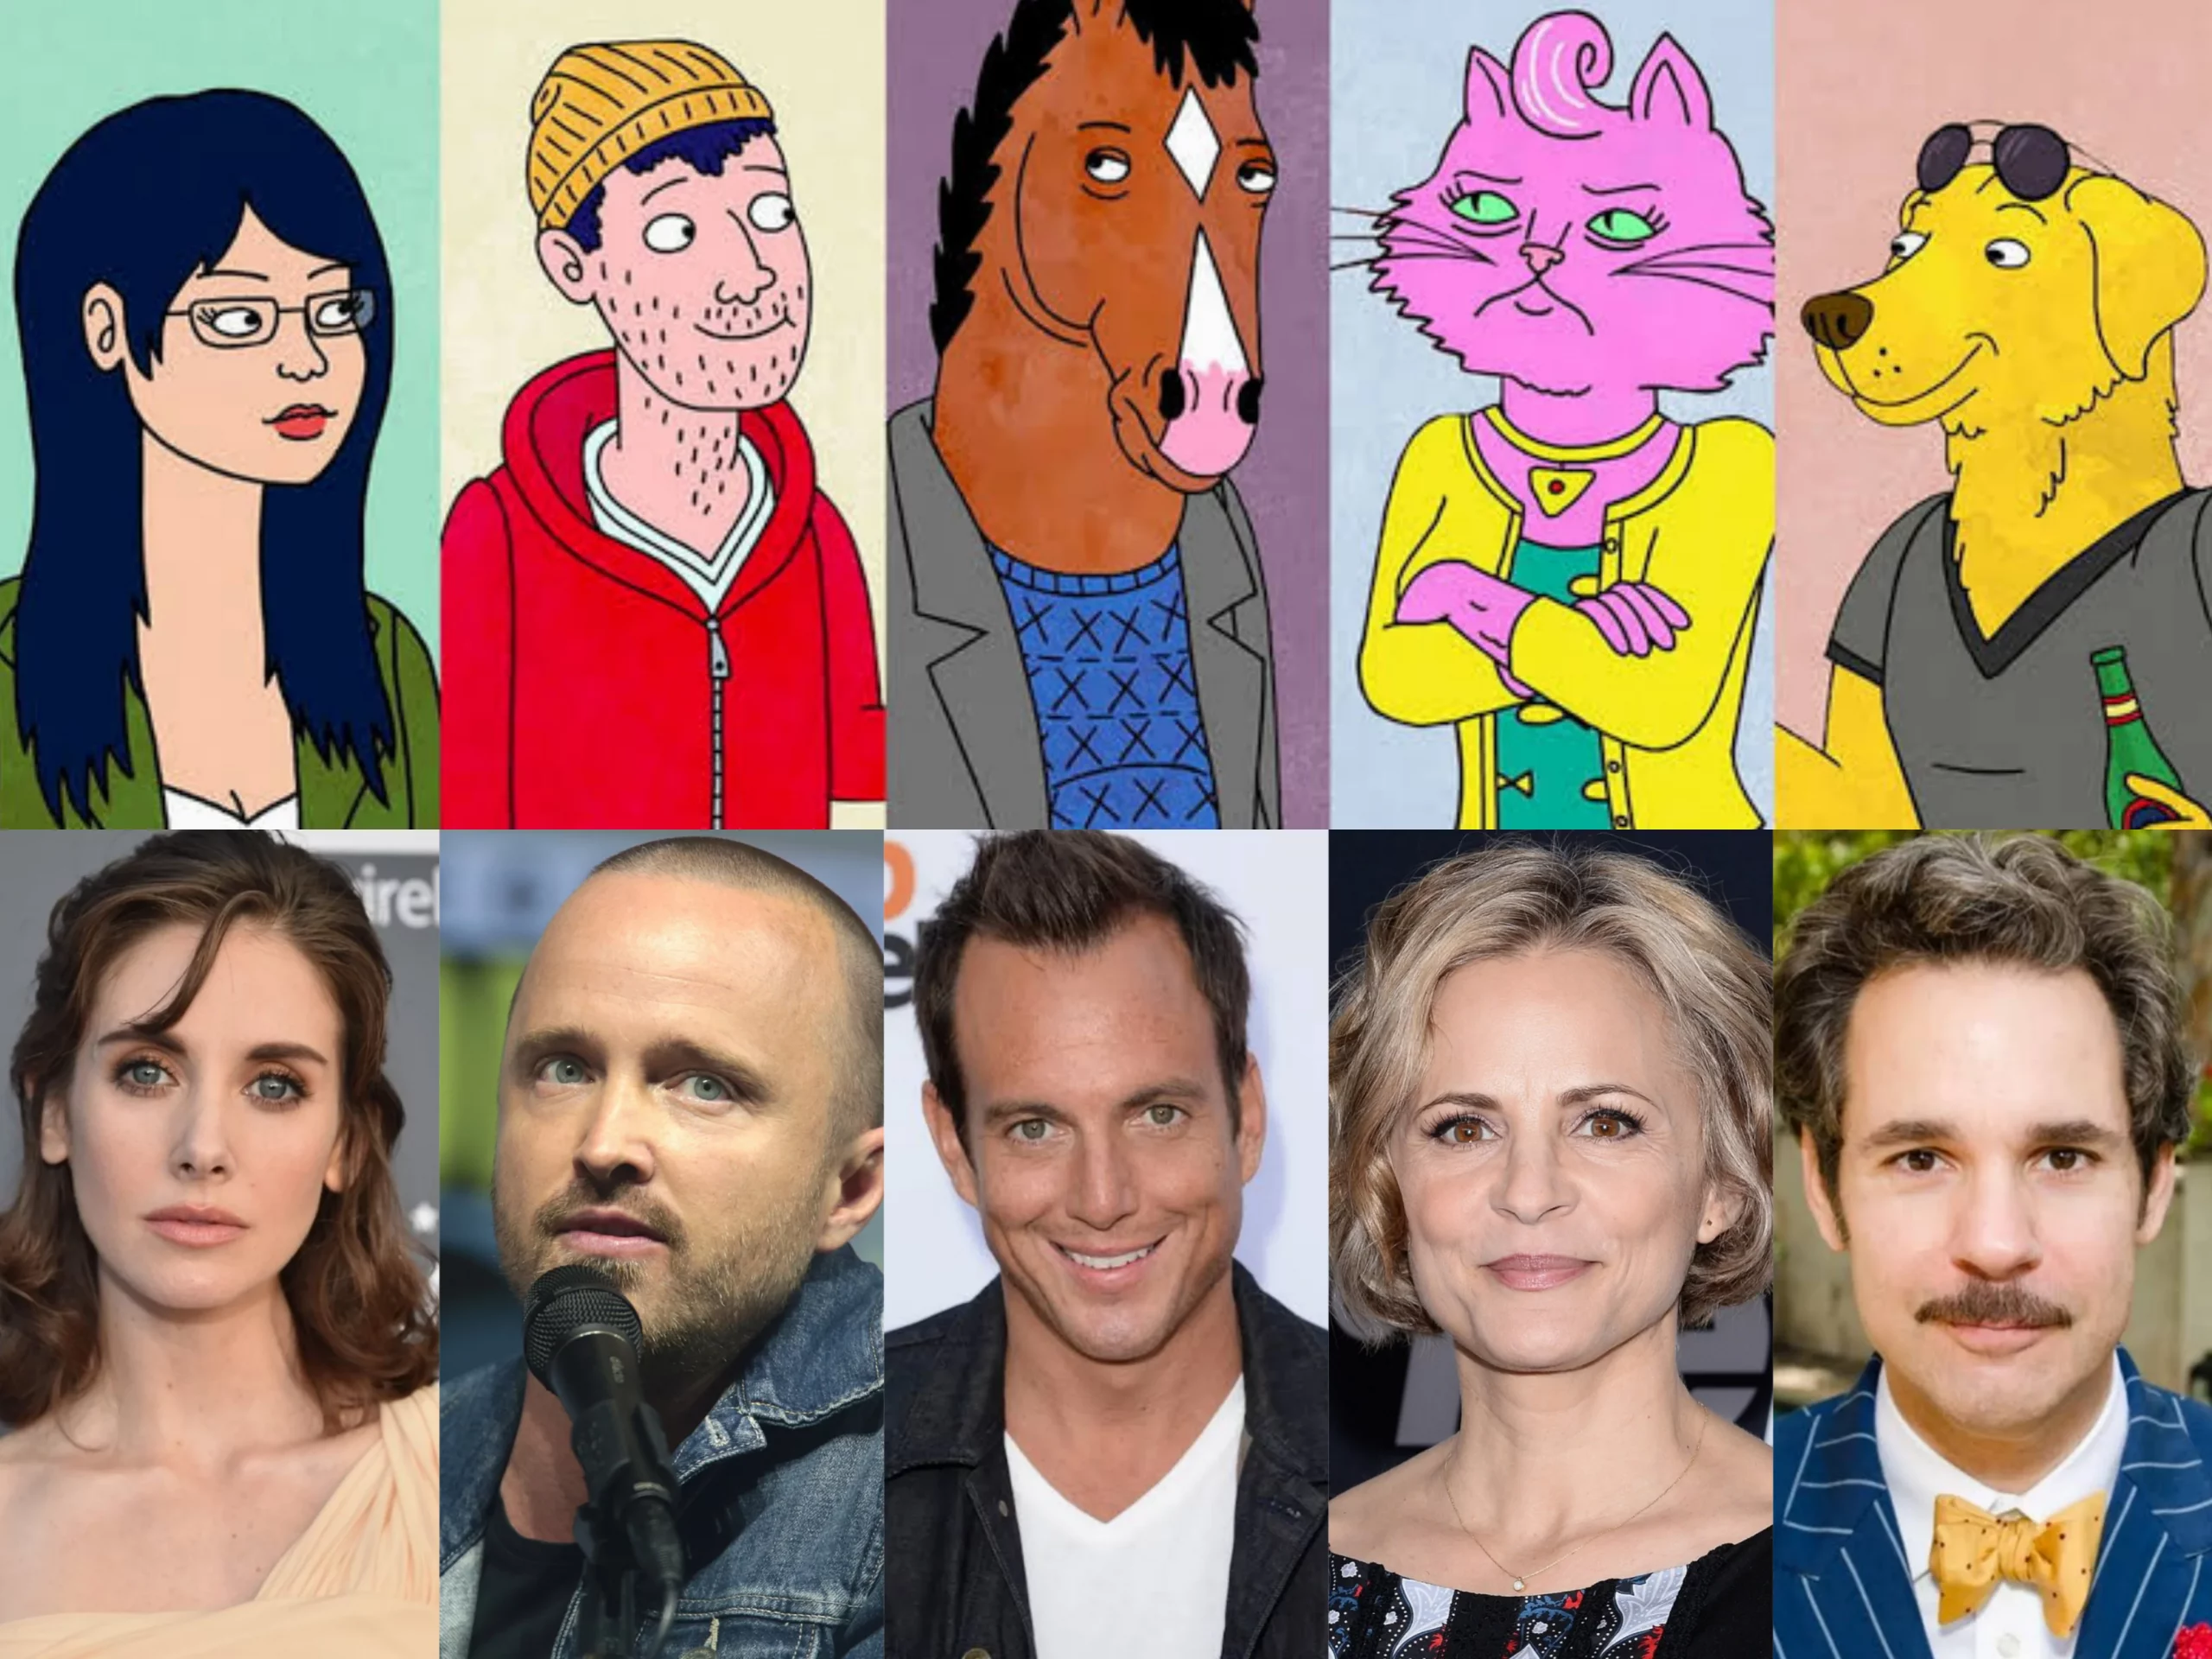 the picture contains voice artists for the show bojack horseman